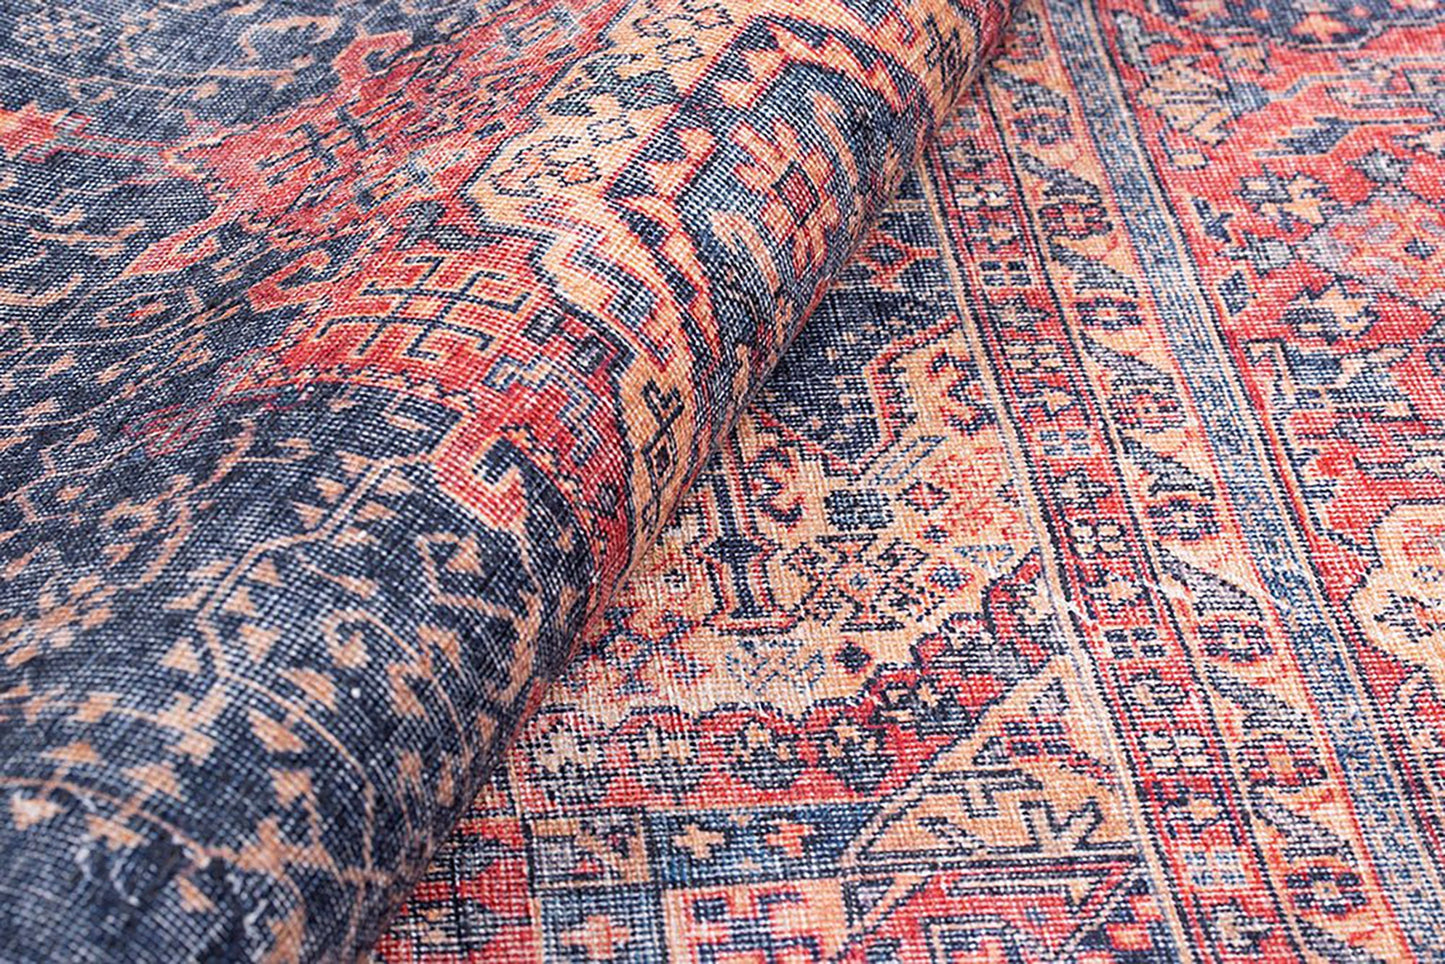 NARGAN | Persian Pattern Oriental Rug, Antique looks, Hand-knotted texture, Home decor, Traditional, Central Medallion, Navy blue, Red, Rugs